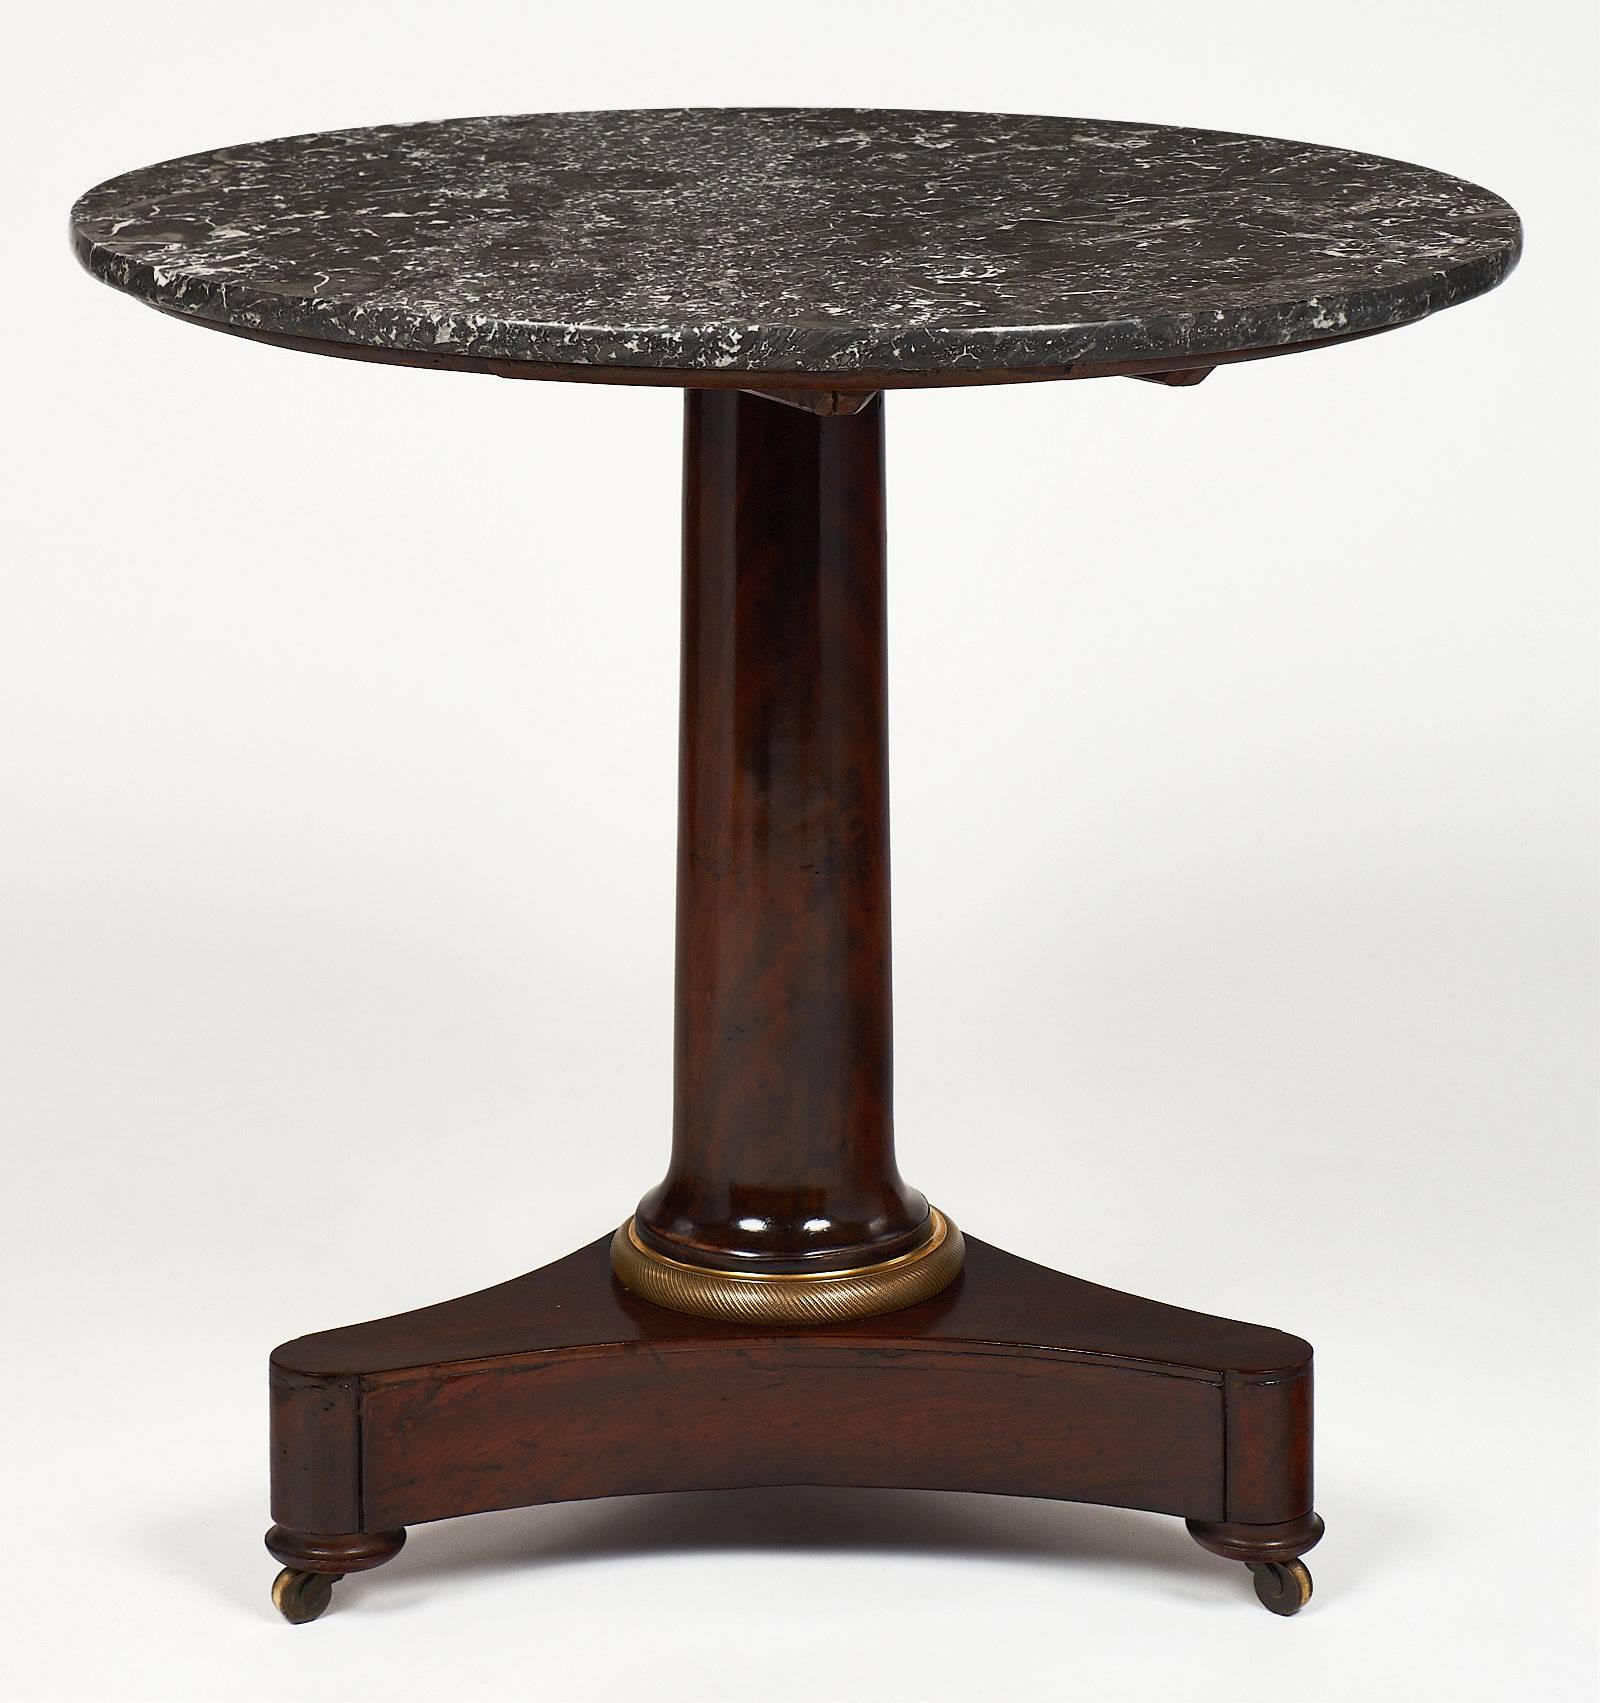 French Empire period gueridon with a gray marble top and a mahogany base. The tripod feet are on casters with a finely cast bronze ring on the center column leg. It is the original Saint Anne marble top.